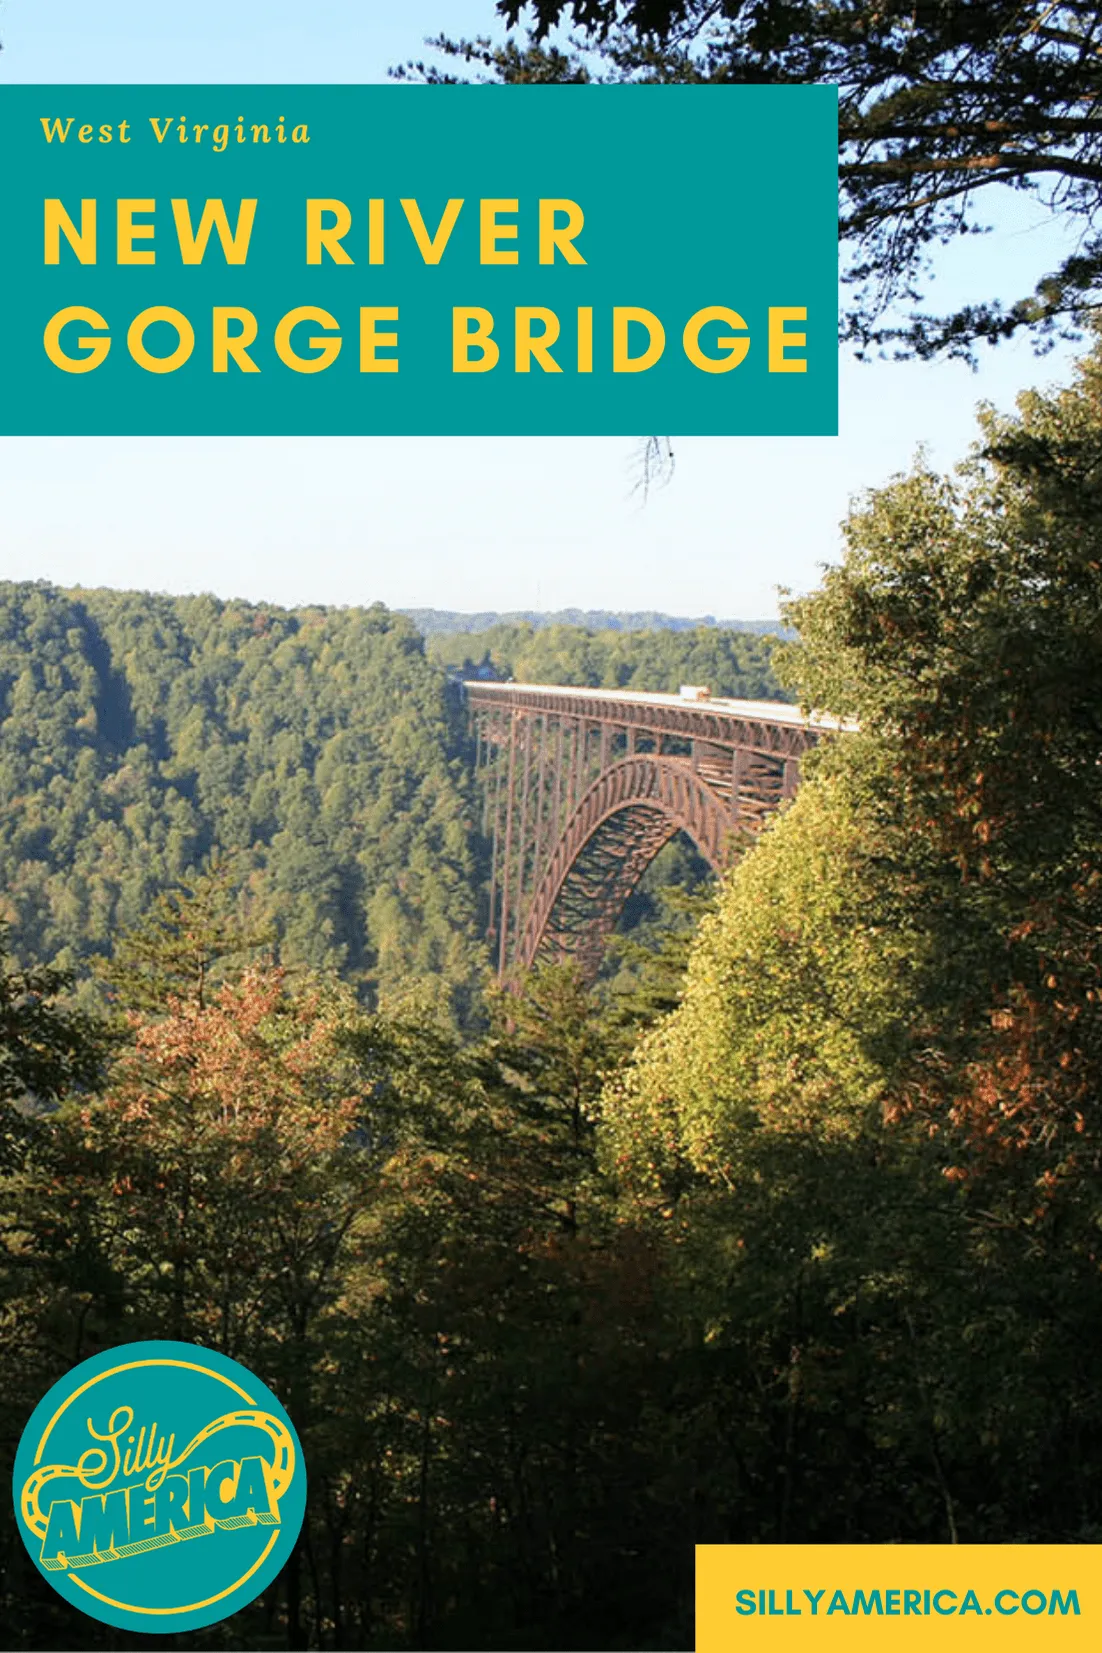 A must-see tourist attraction in West Virginia is the New River Gorge Bridge. While this road trip stop is far from the normal "world's largest things" we write about here, it's an impressive site and not to be missed if driving through the area. #WestVirginiaRoadsideAttractions #WestVirginiaRoadsideAttraction #RoadsideAttractions #RoadsideAttraction #RoadTrip #WestVirginiaRoadTrip #WestVirginiaTravelRoadTrip #ThingsToDoInWestVirginia #WestVirginiaMountainsRoadTrip 